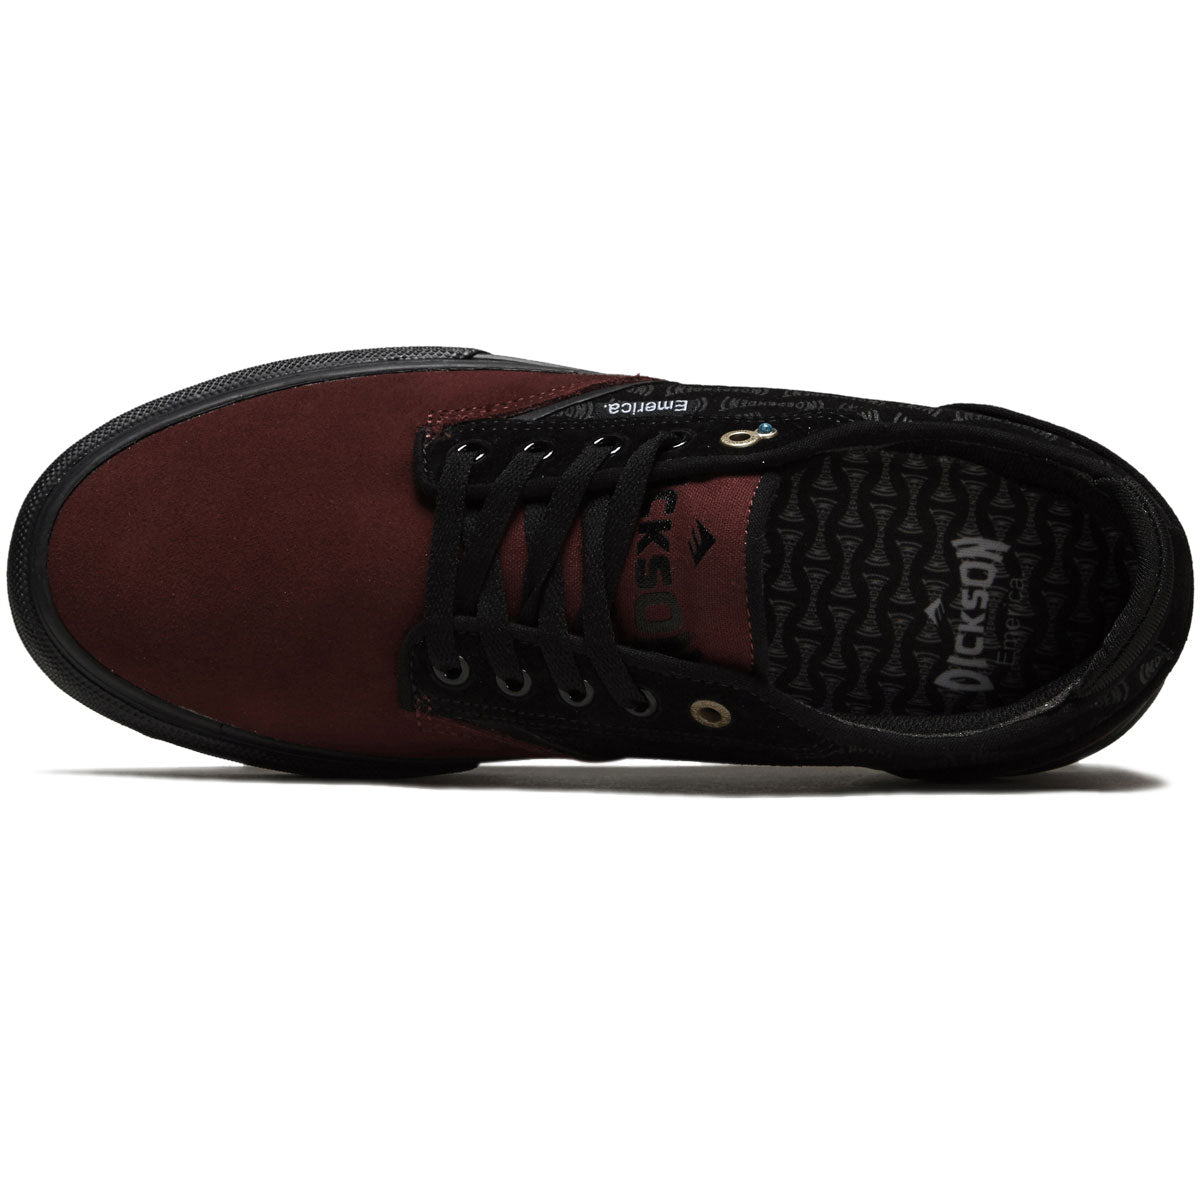 Emerica x Independent Dickson Skate Shoes - Red/Black